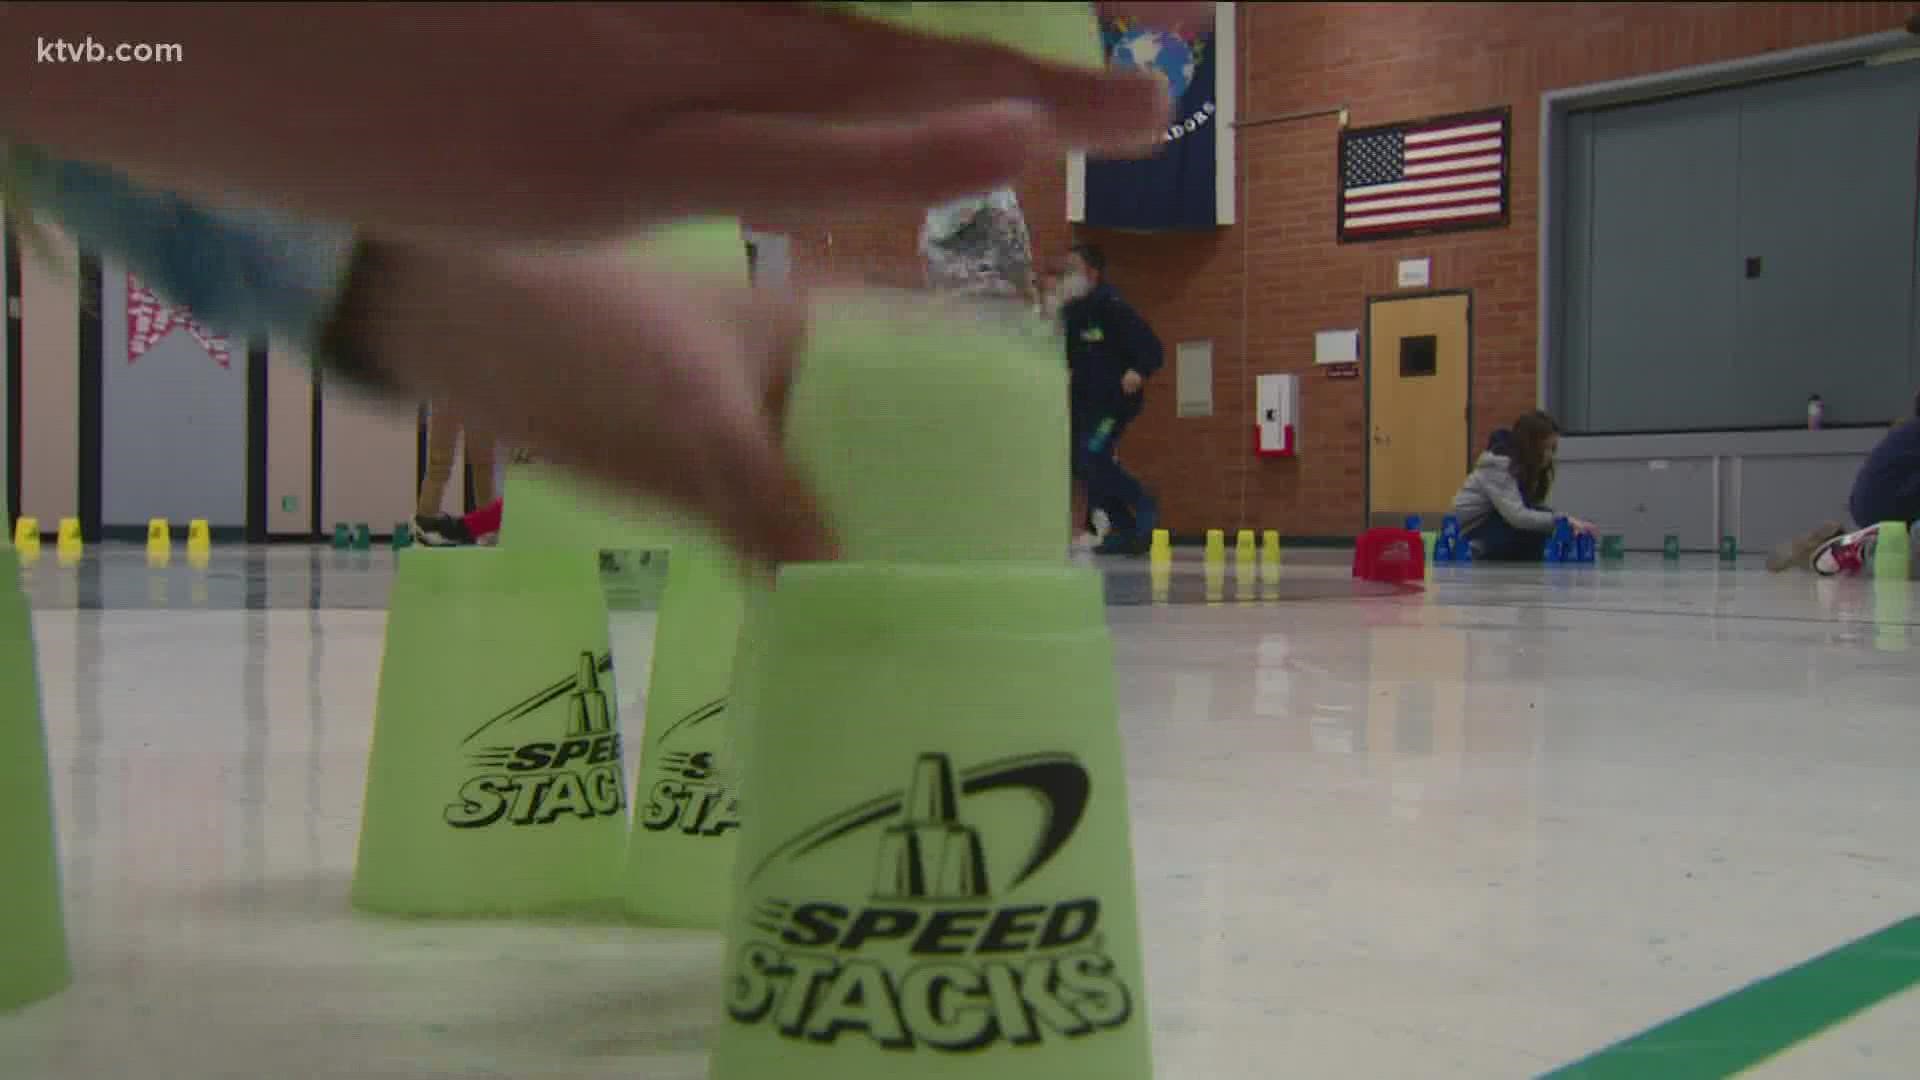 This event is hoping to set a record for the most people sport stacking at multiple locations.